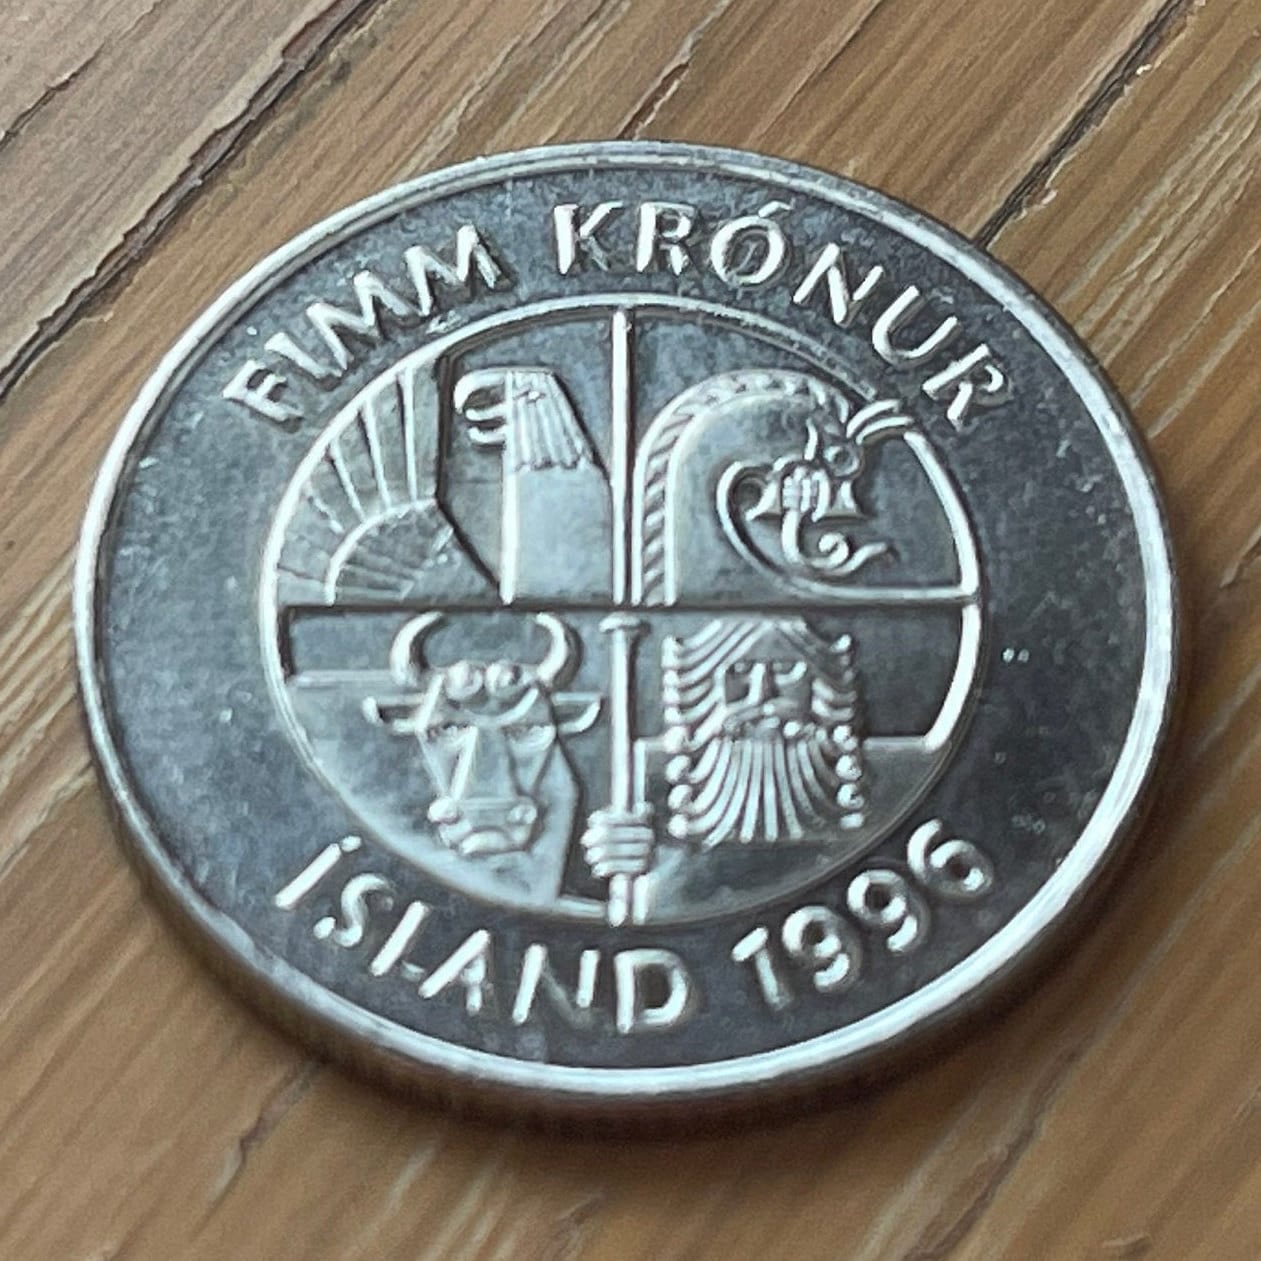 Two Dolphins 5 Kronur Iceland Authentic Coin Money for Jewelry and Craft Making